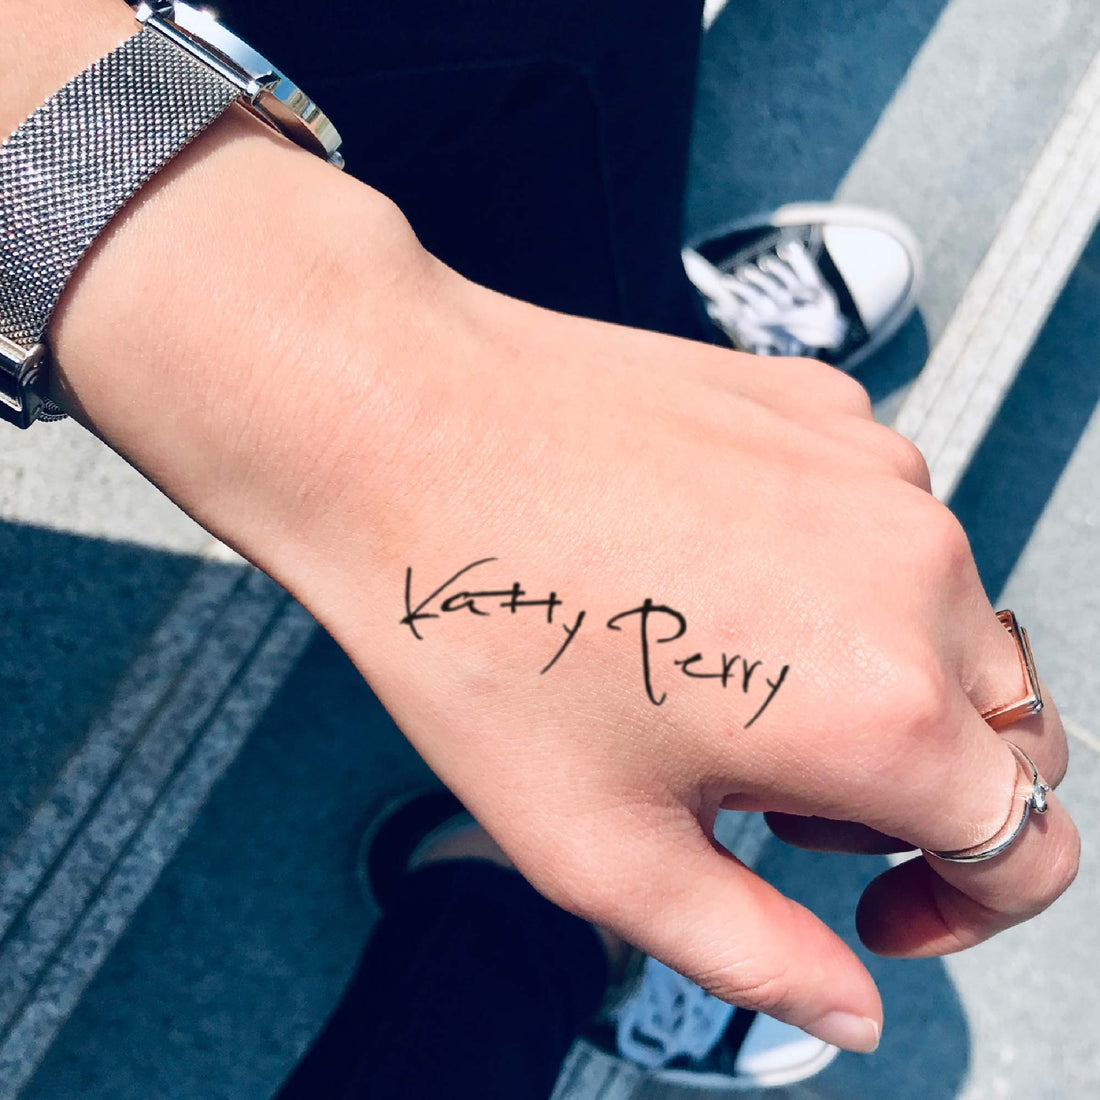 Katy Perry custom temporary tattoo sticker design idea inspiration meanings removal arm wrist hand words font name signature calligraphy lyrics tour concert outfits merch accessory gift souvenir costumes wear dress up code